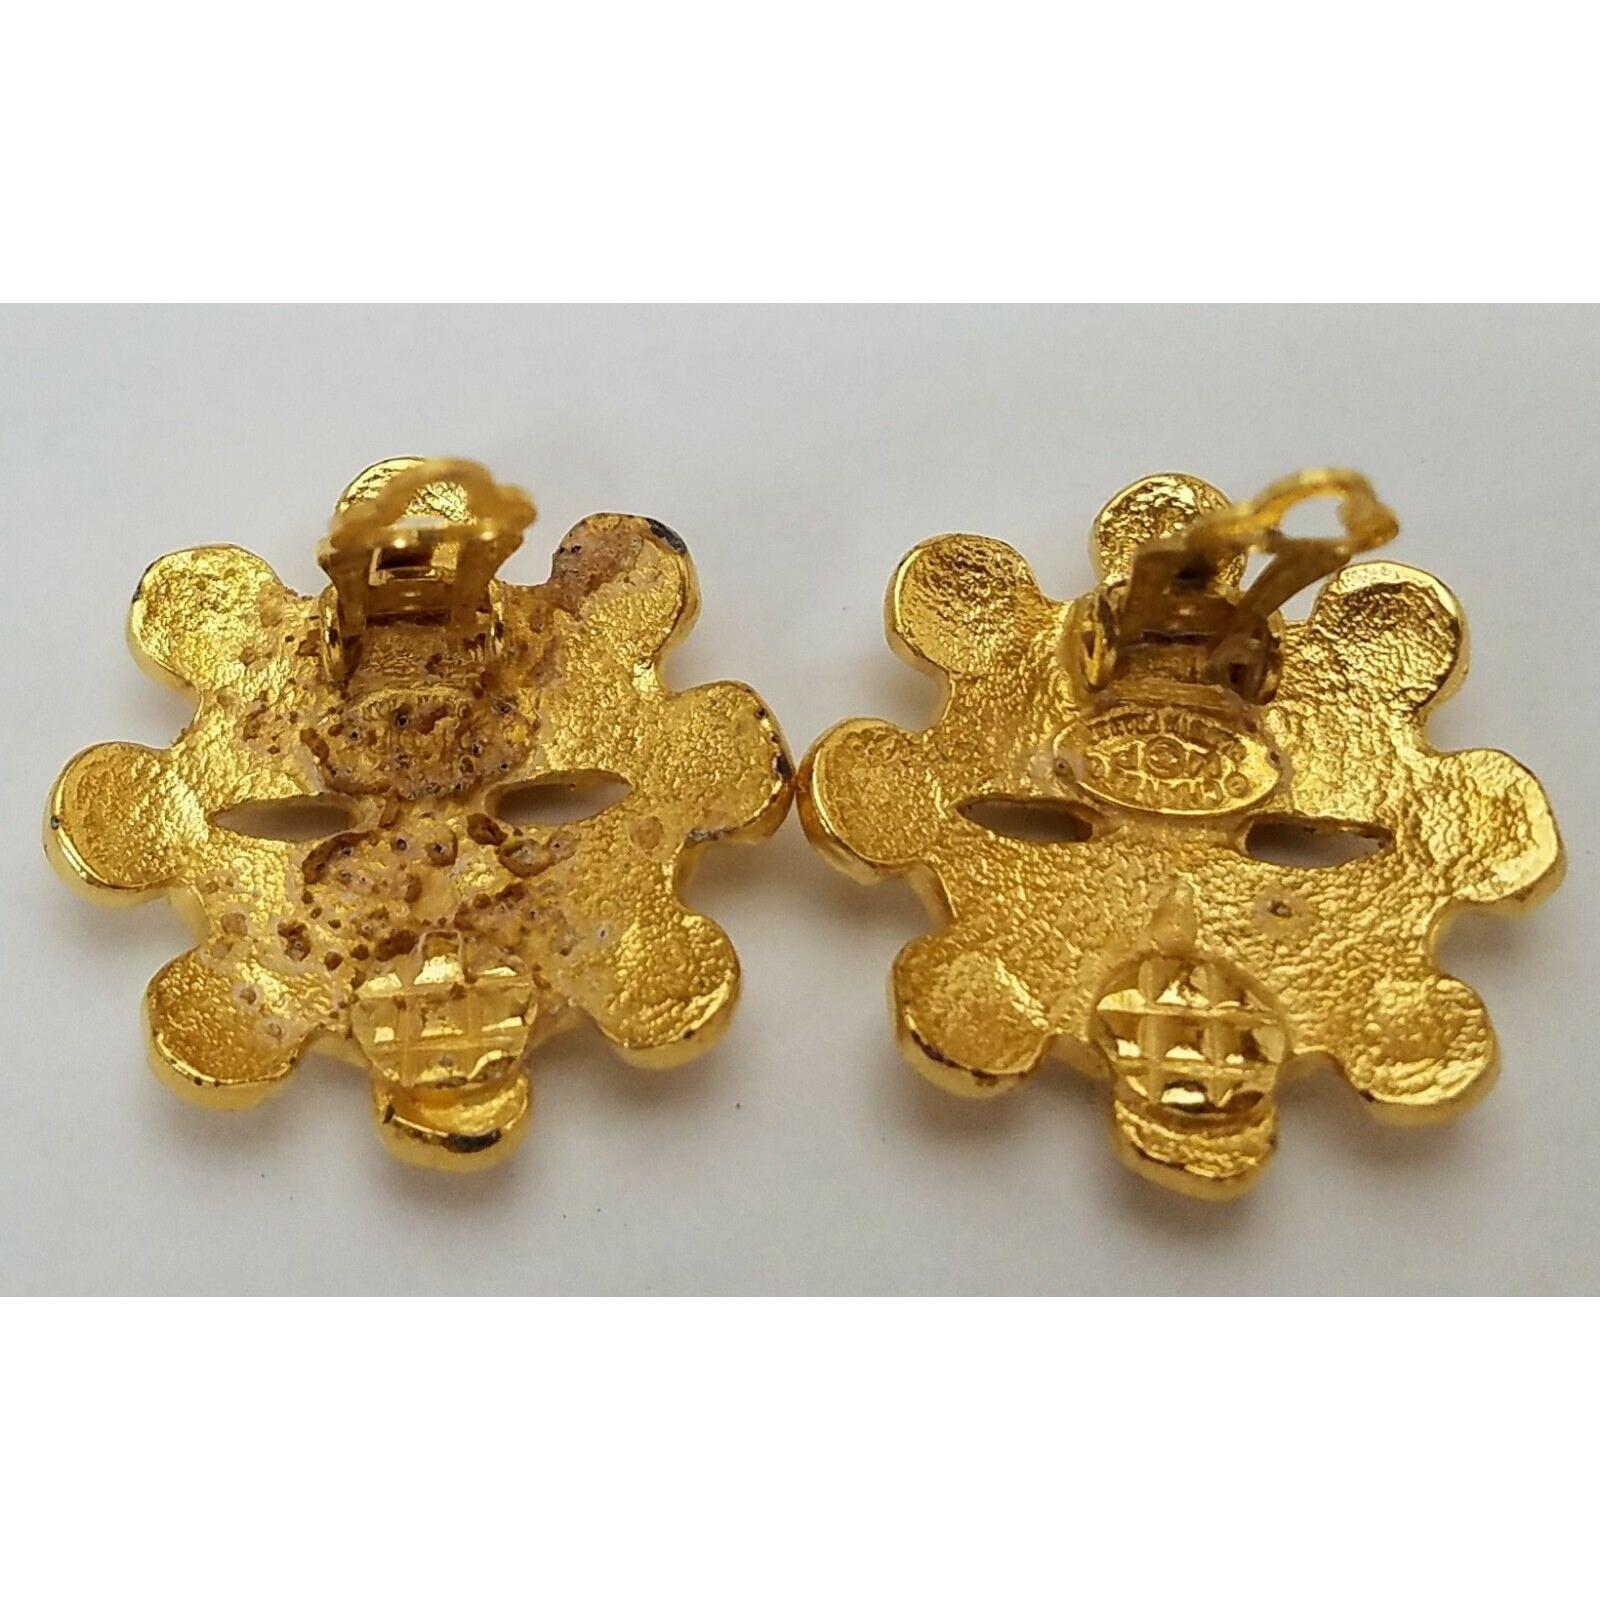 Gold Chanel Mademoiselle Coco Chanel Clip-On Earrings – Designer Revival